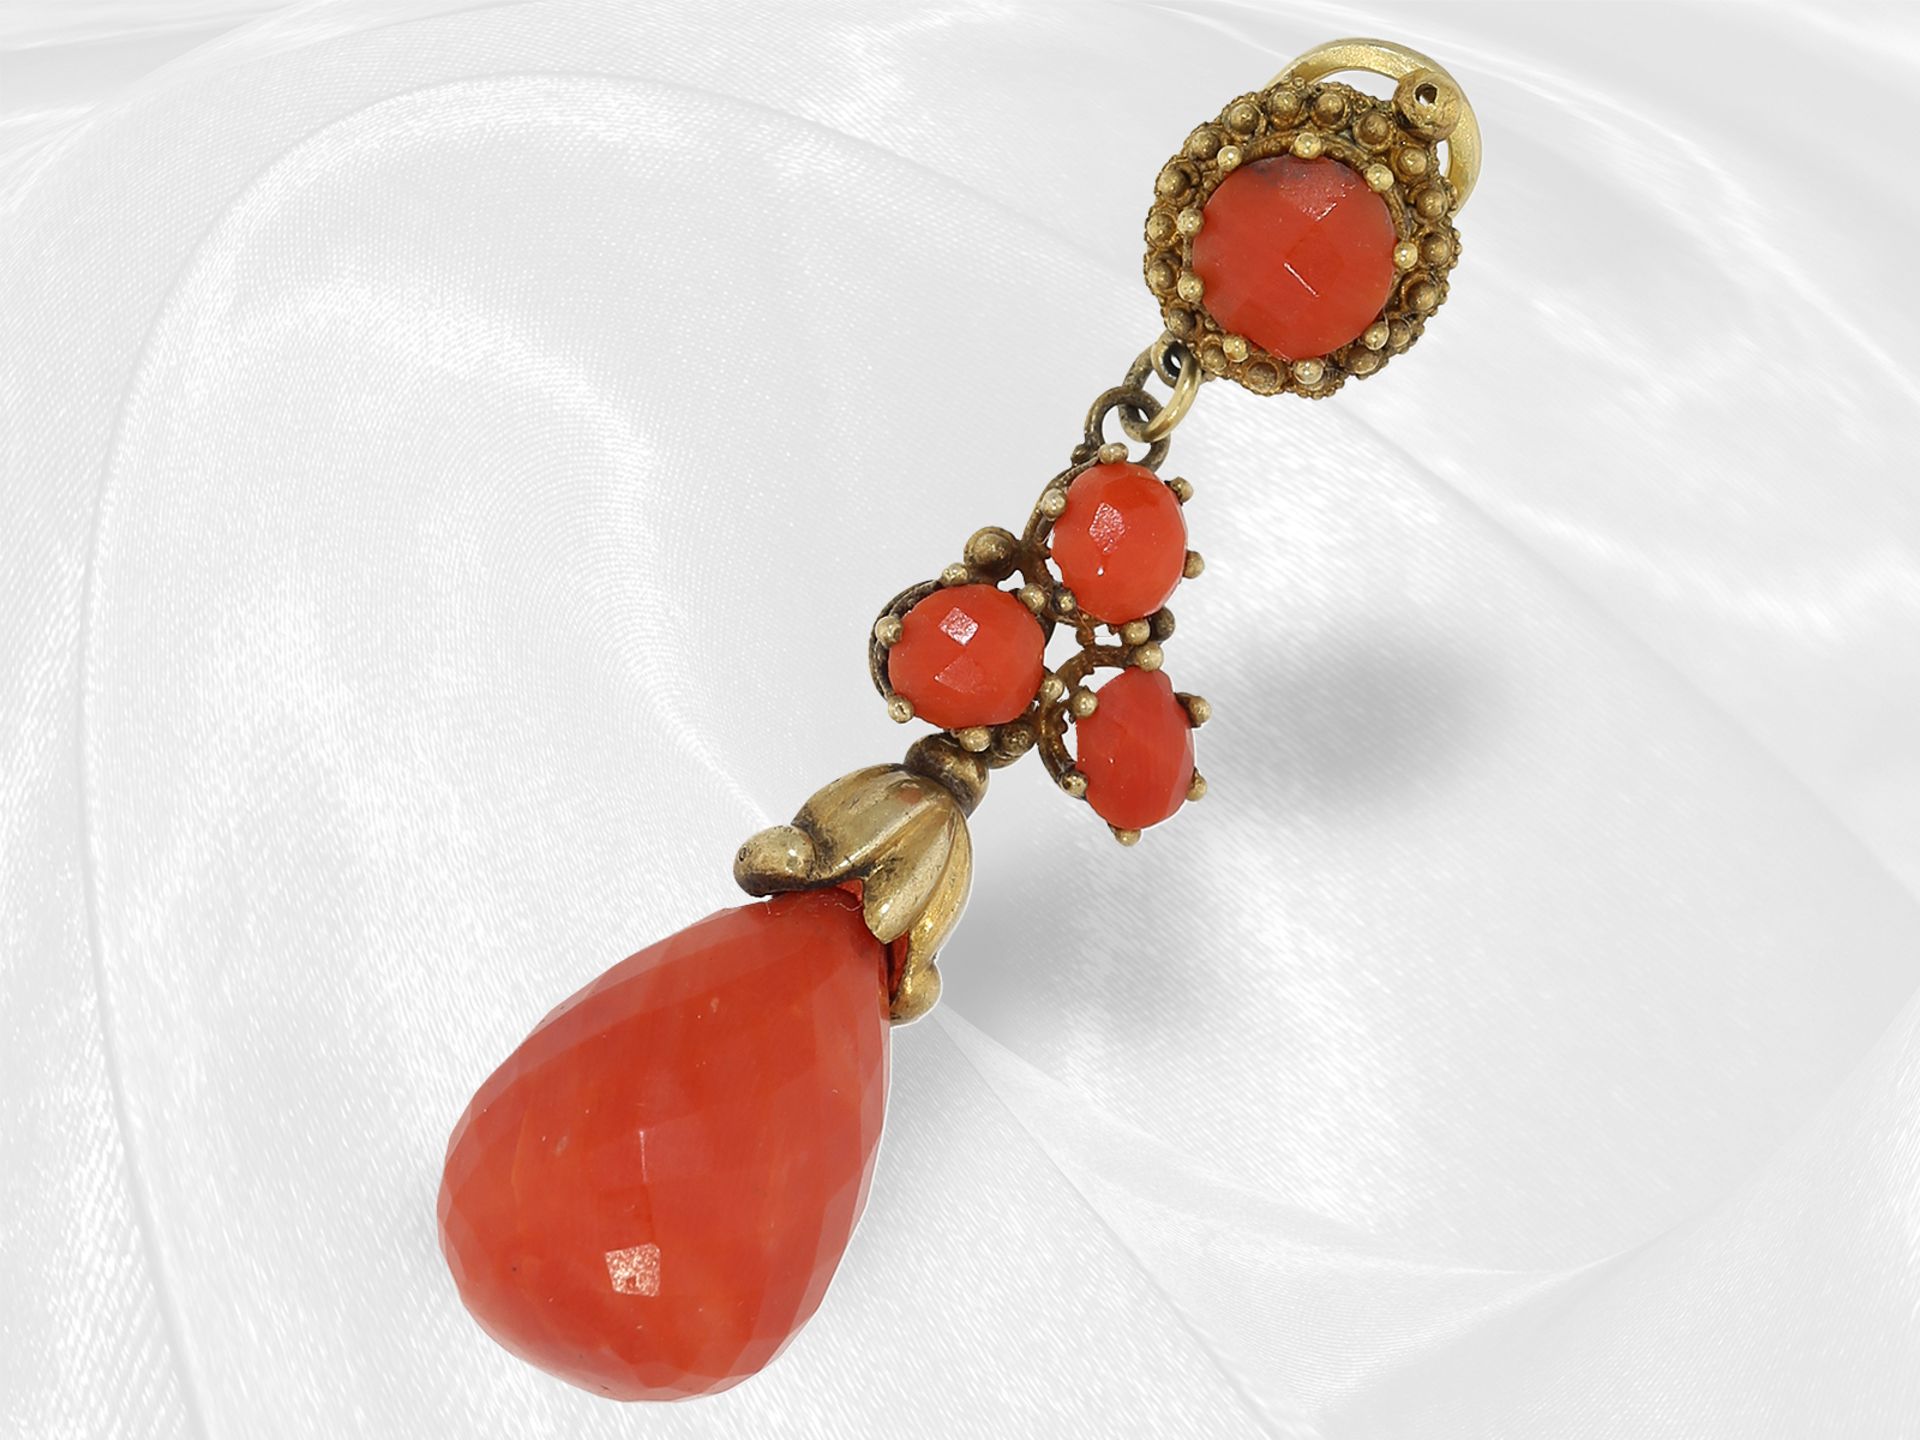 Pendant/Brooch/Comb: Collection of rare antique coral jewellery, around 1900 - Image 7 of 7